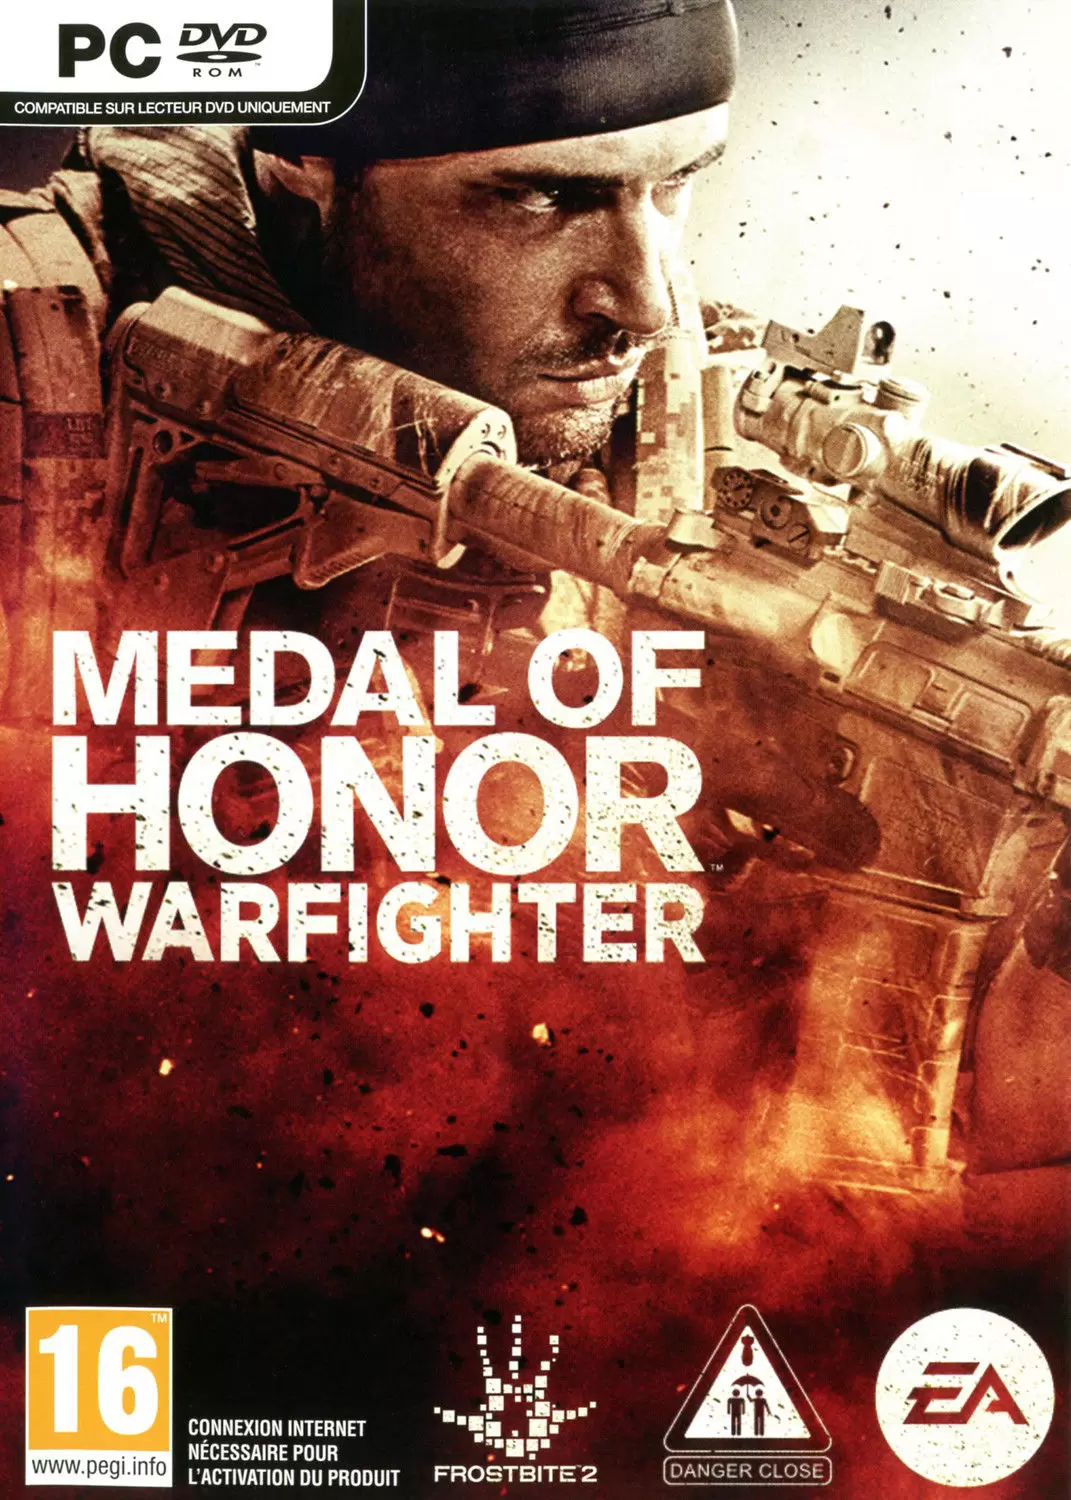 PC Games - Medal of Honor : Warfighter